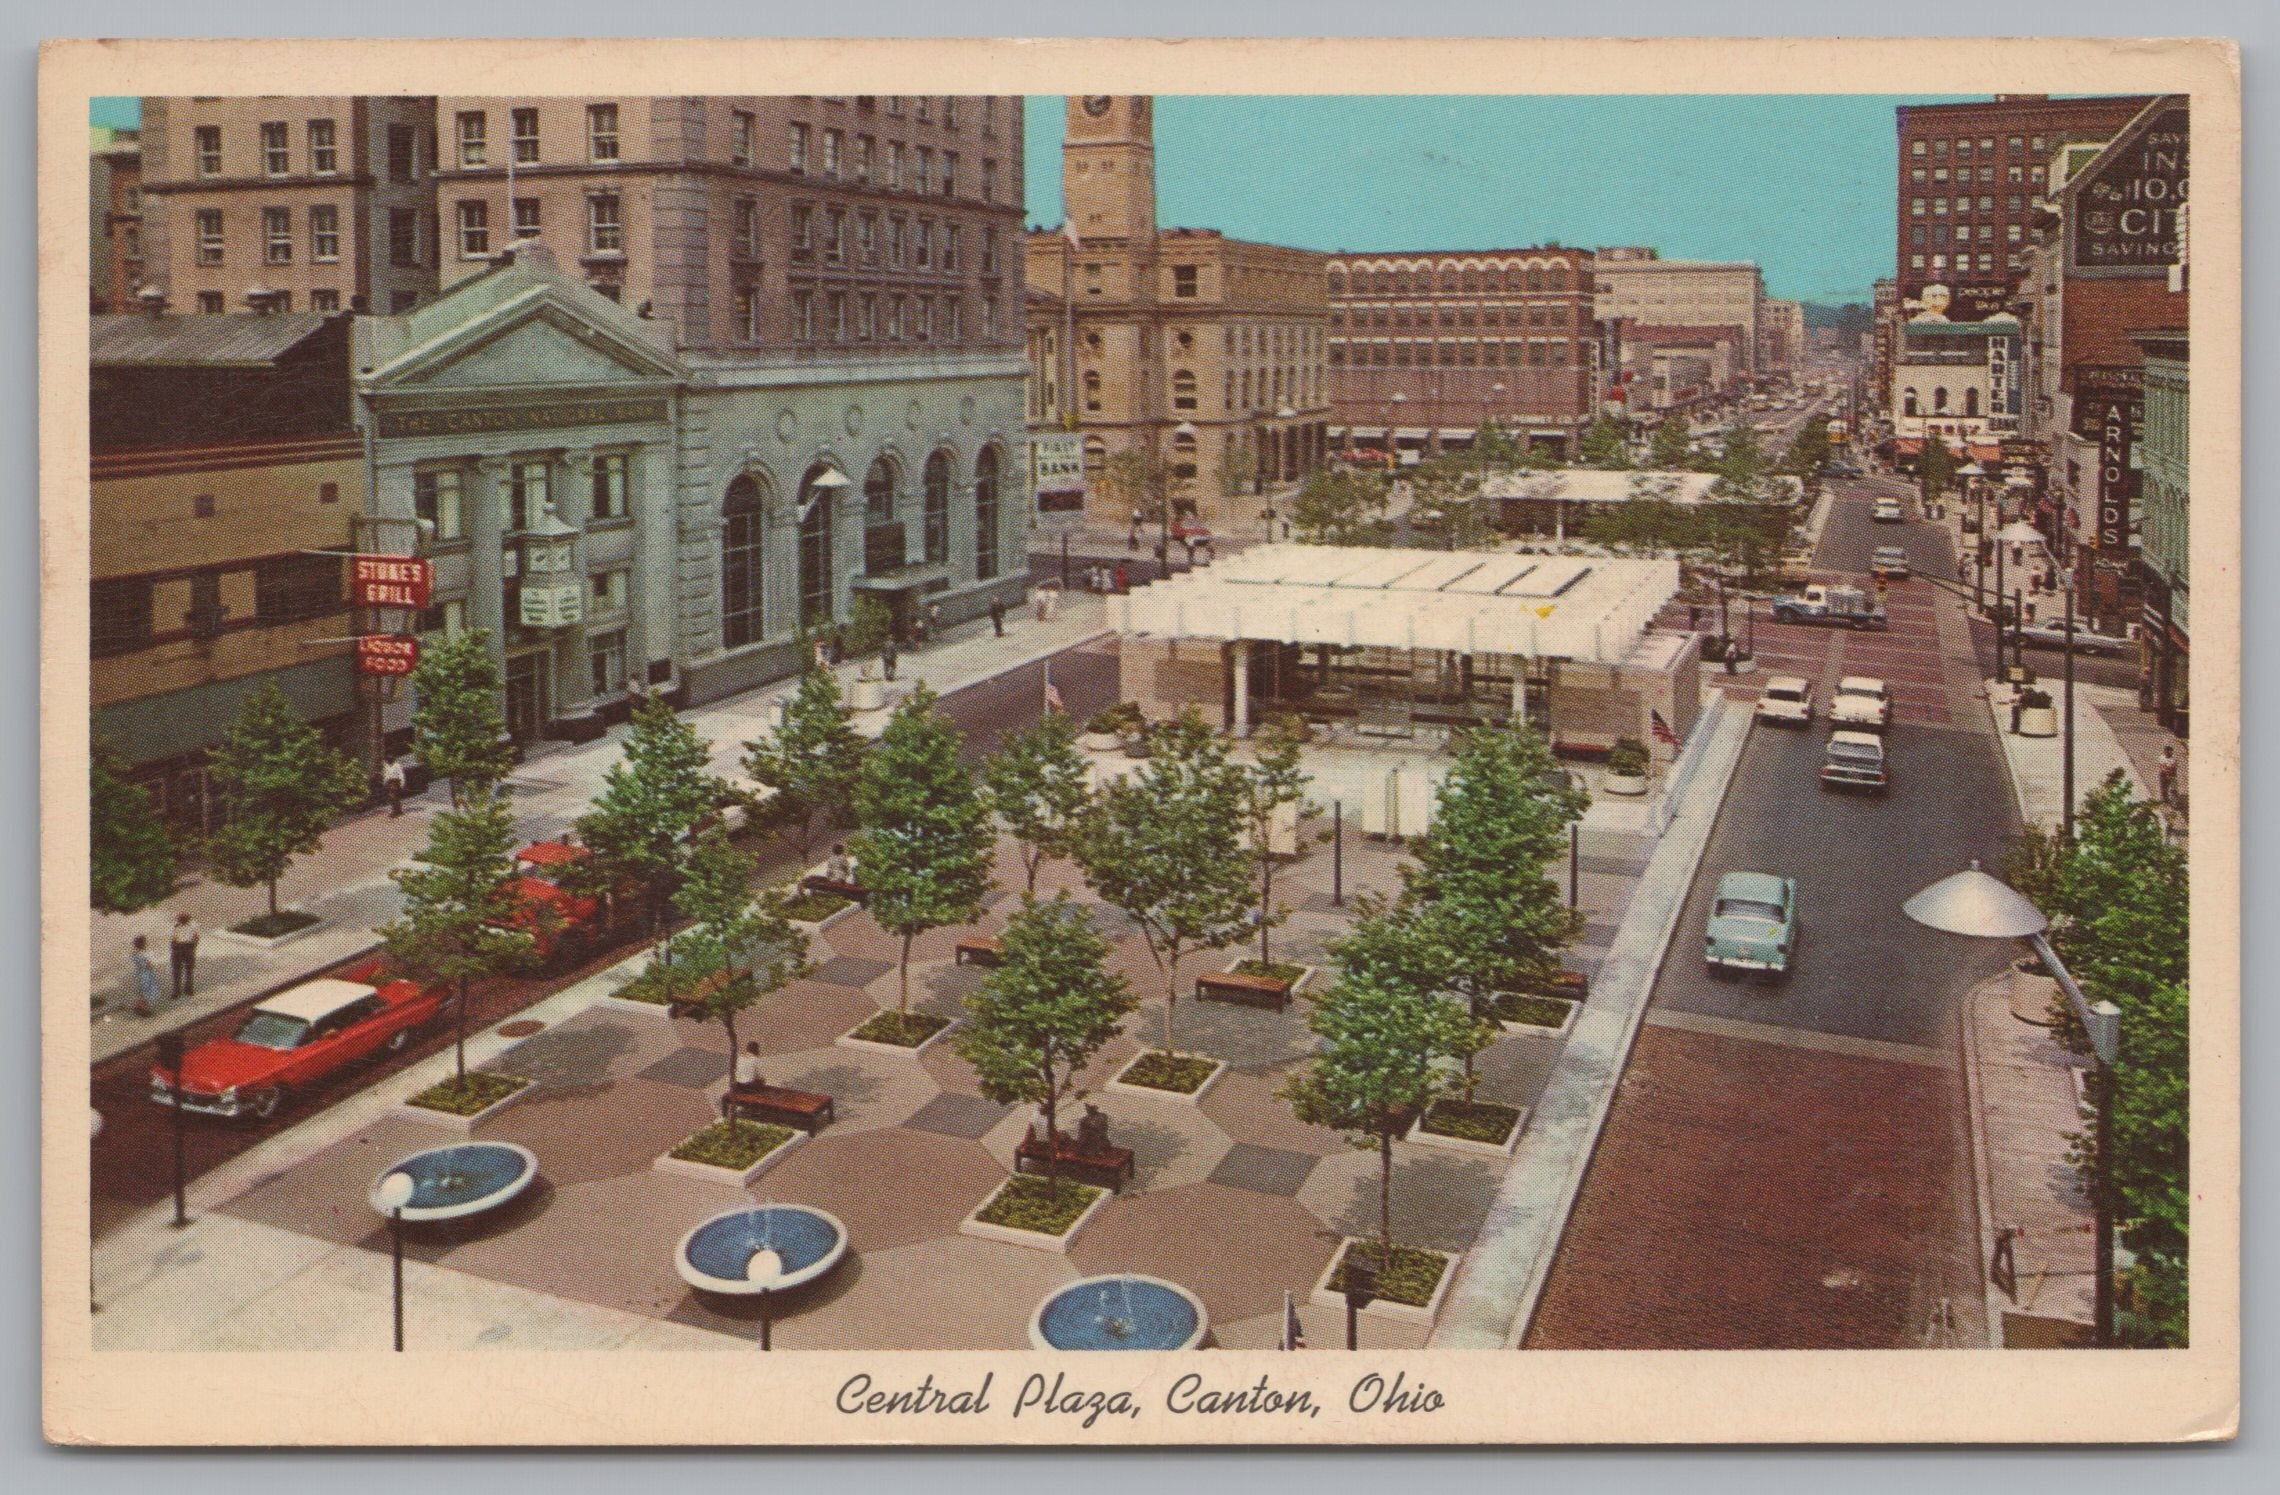 Central Plaza, Looking North In Downtown Canton, Ohio, USA, Vintage Post Card.